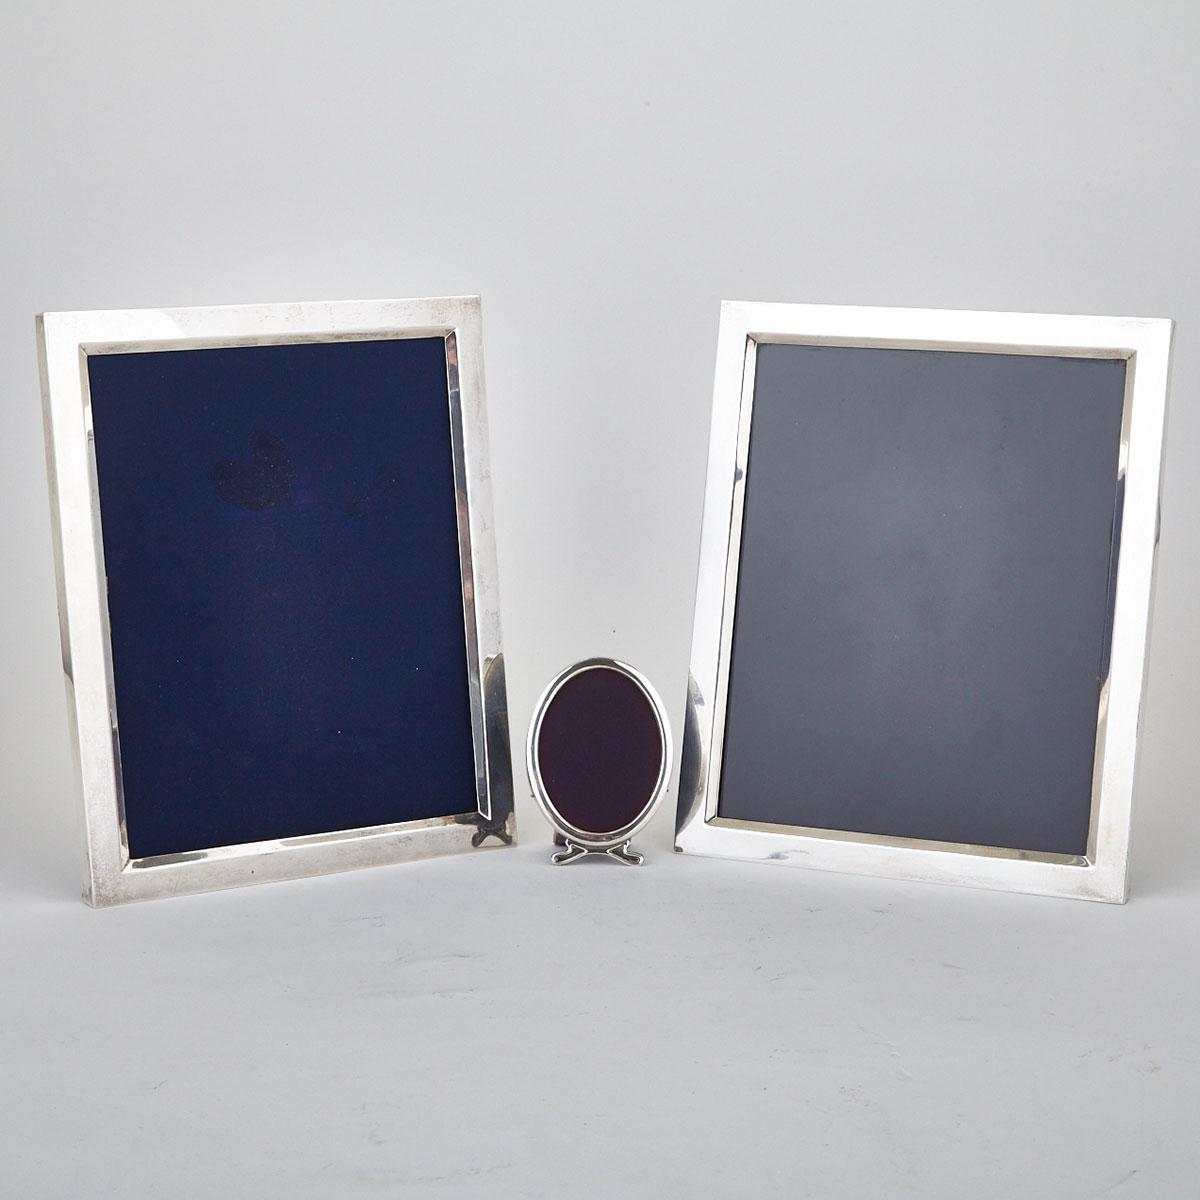 Pair of Canadian Silver Rectangular Photograph Frames and a Smaller Oval Frame, Henry Birks & Sons, Montreal, Que., 1960/62